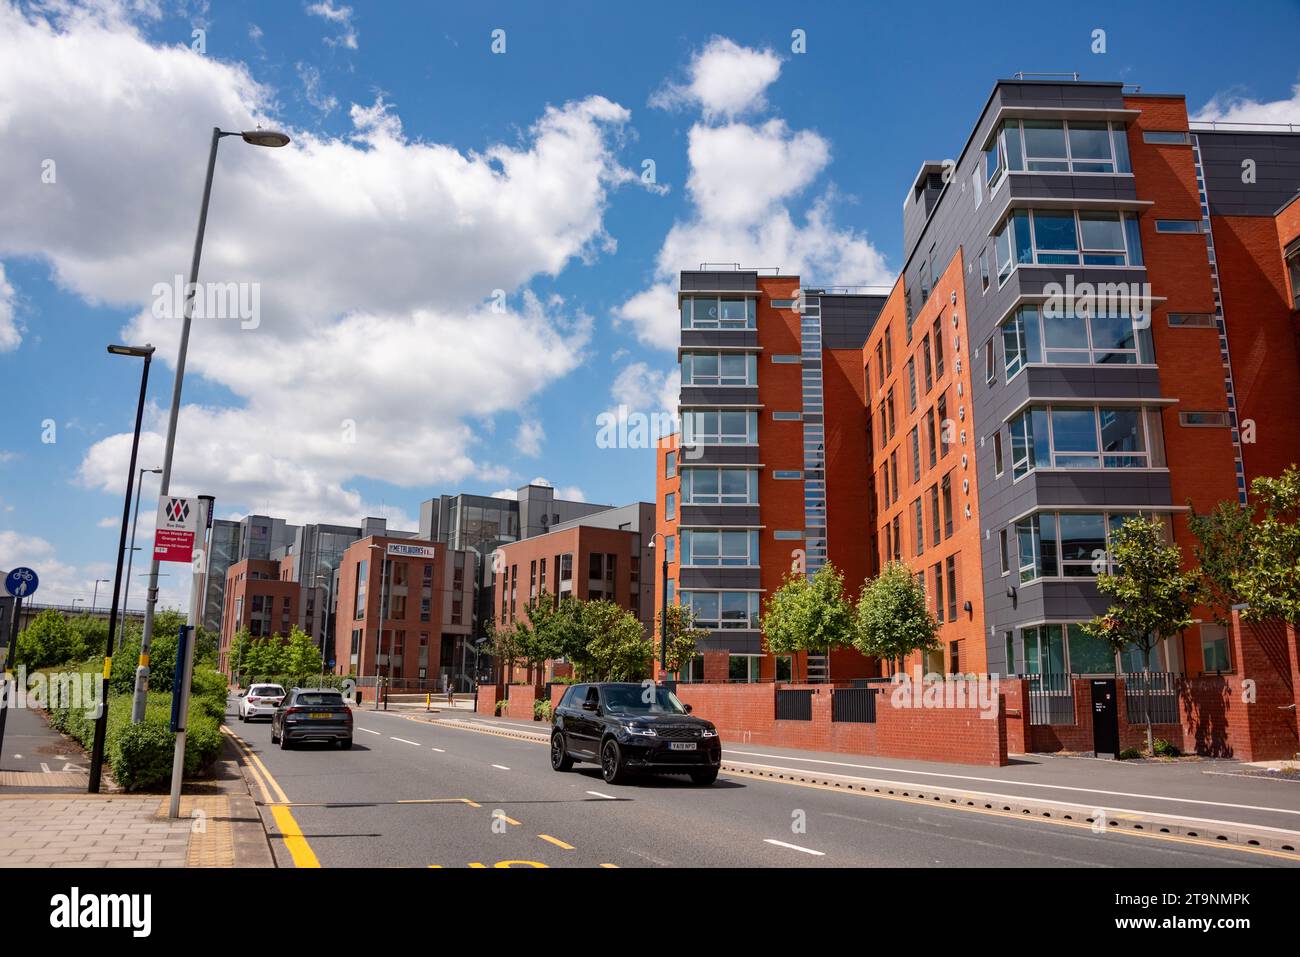 Purpose-built student accommodation in Selly Oak, close to the University of Birmingham, UK Stock Photo